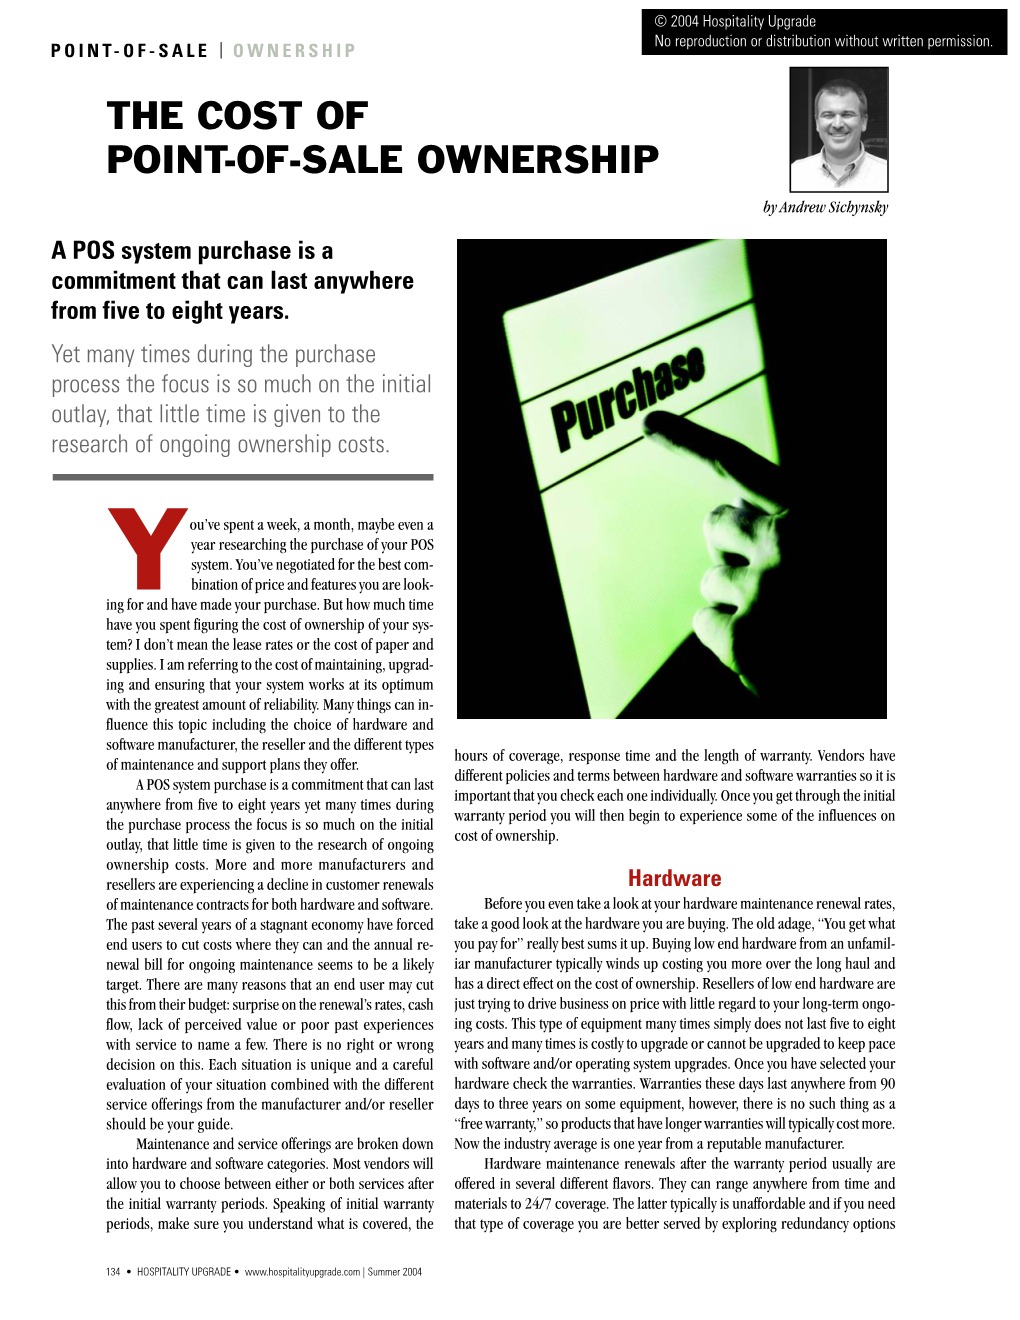 The Cost of Point-Of-Sale Ownership